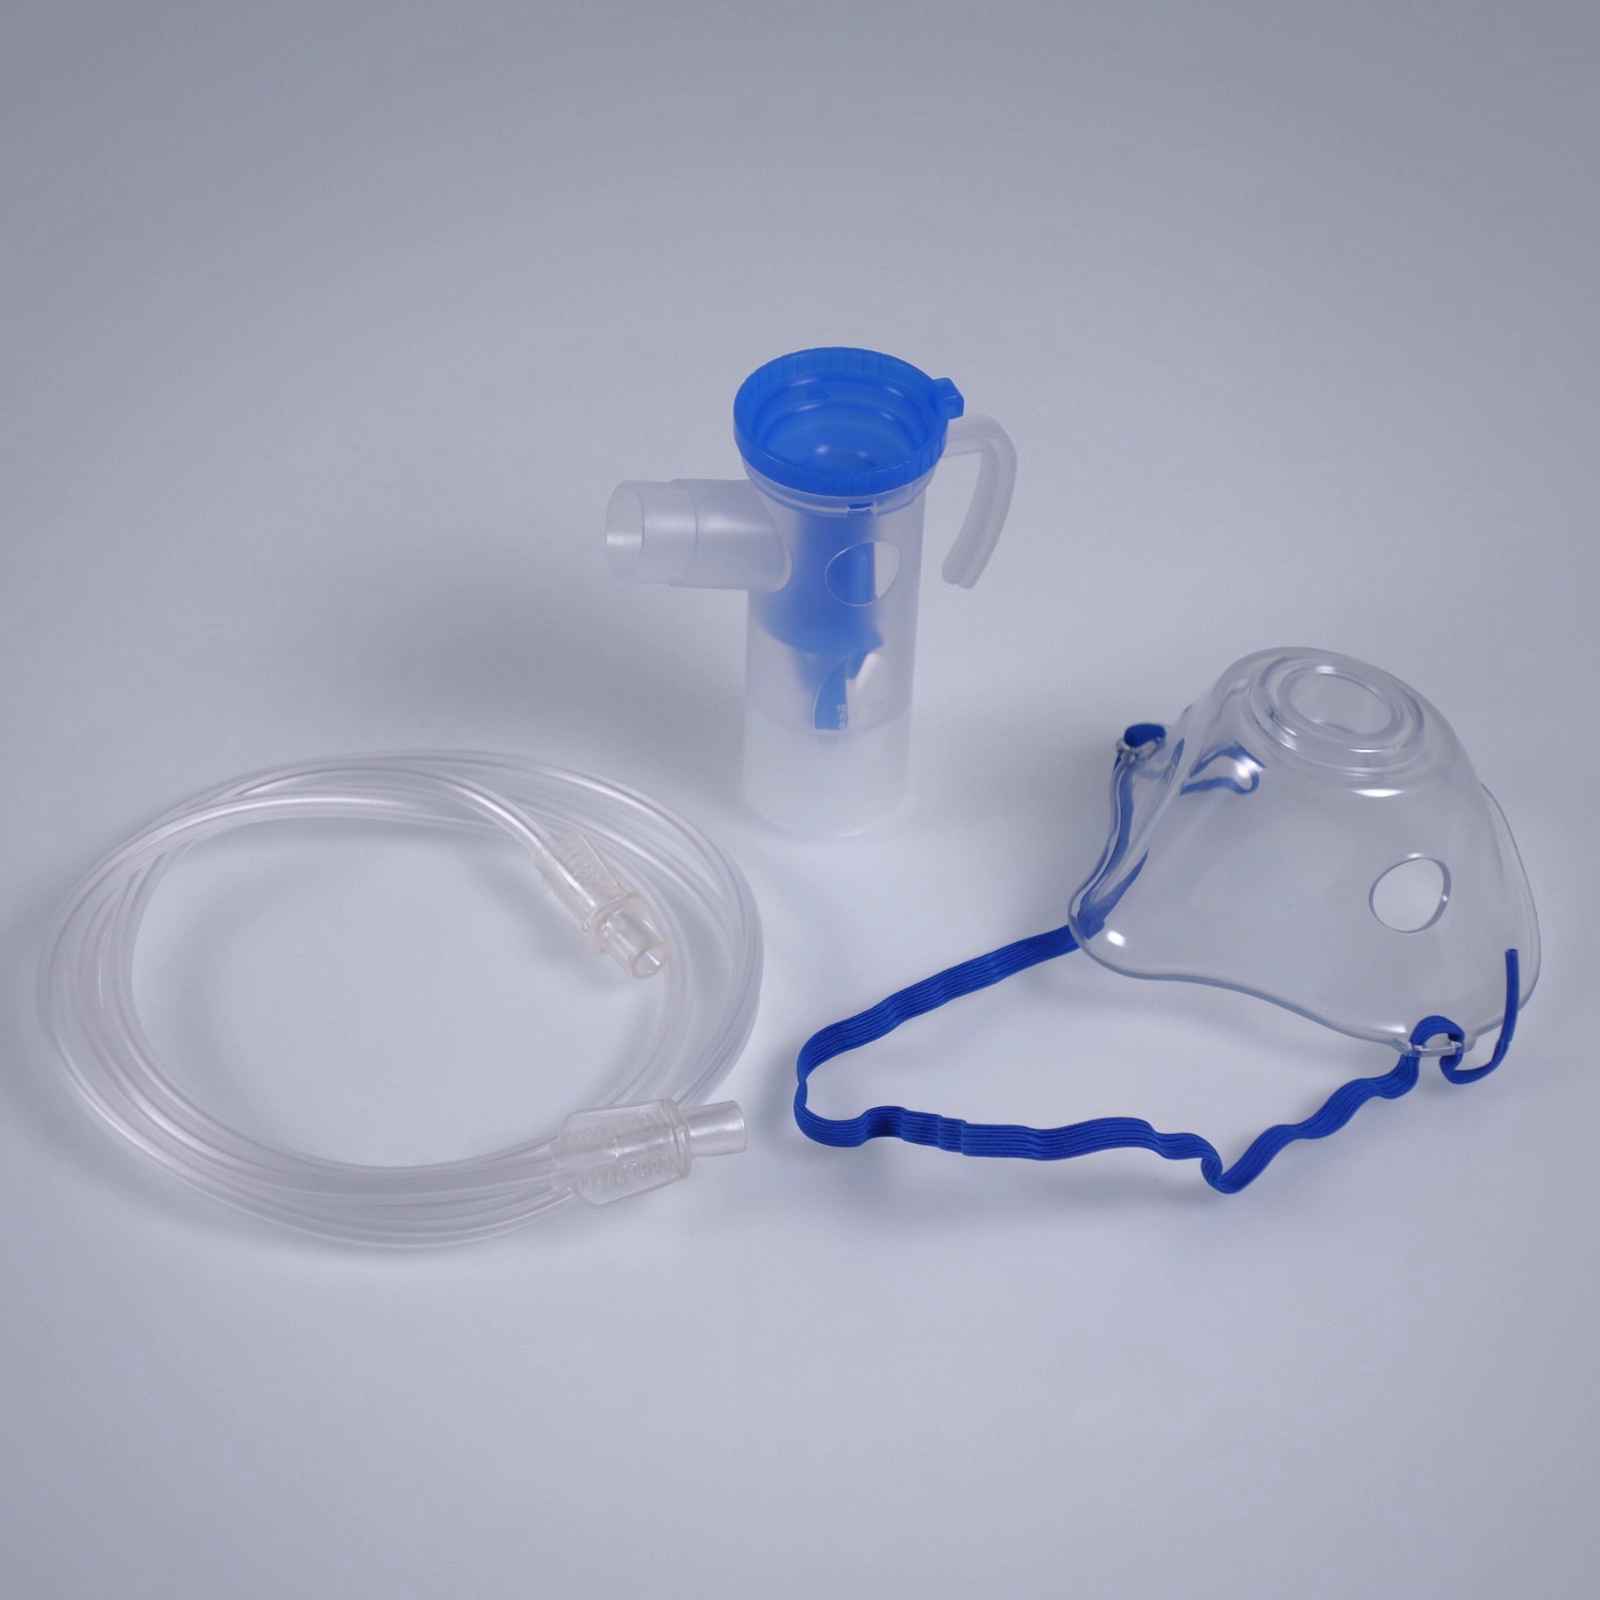 Disposable nebulizer cup with mask